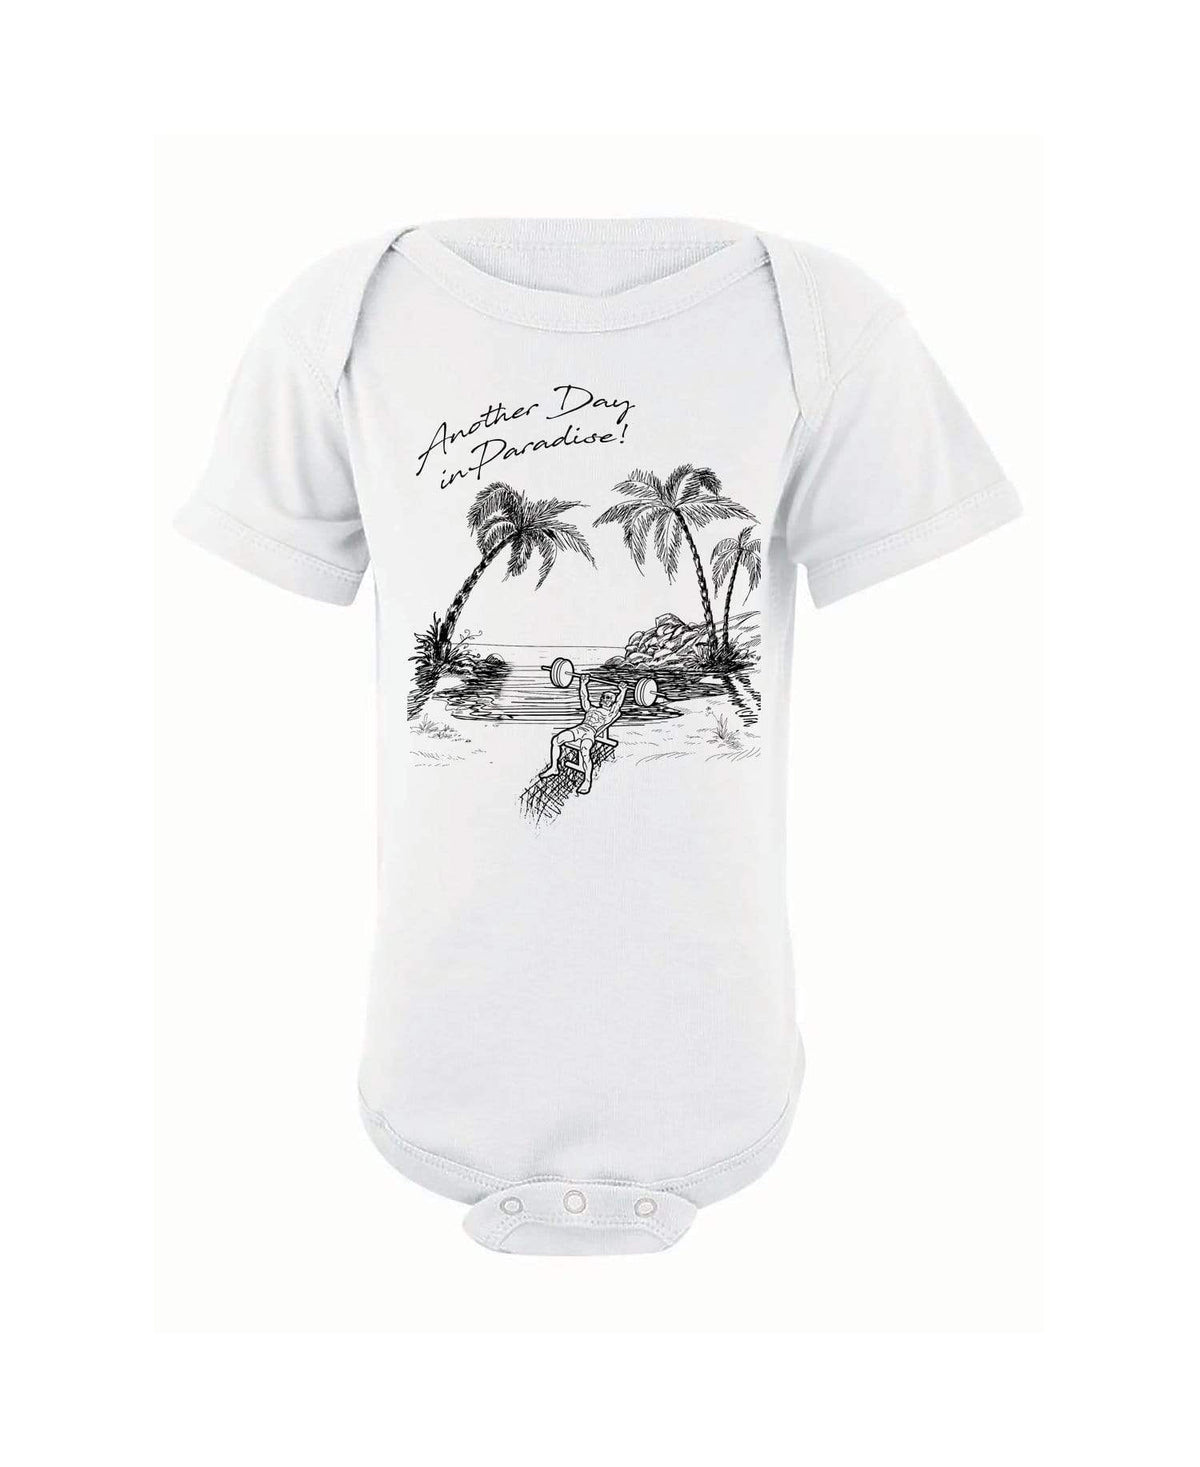 Another Day In Paradise Infant Onesie NB / White TuffWraps.com